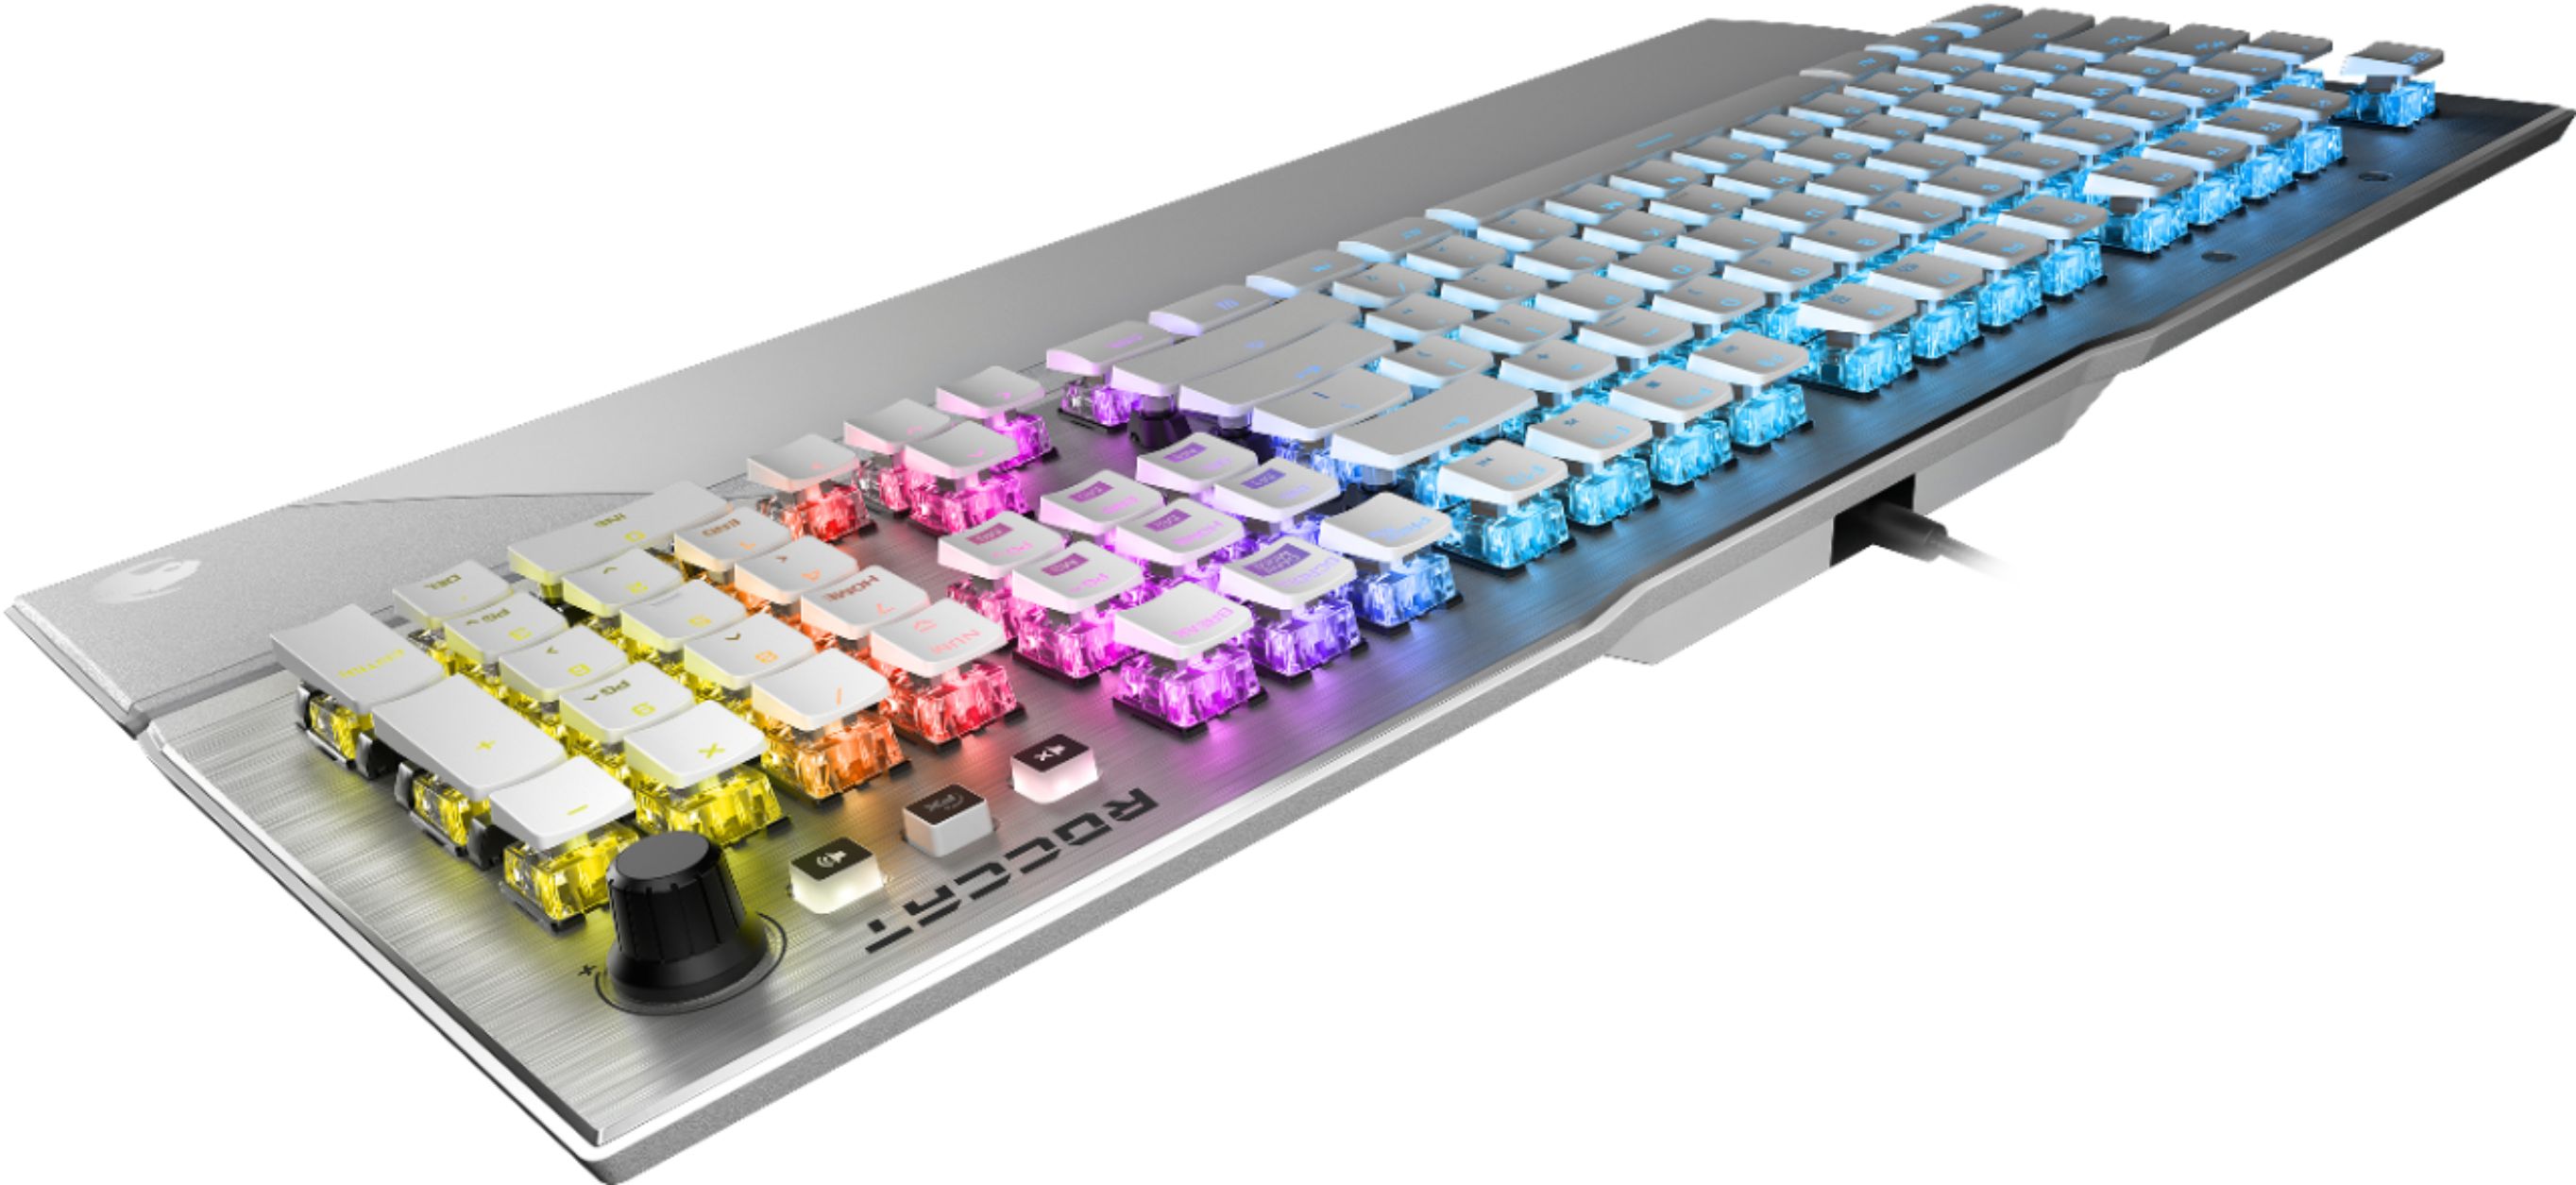 Vulcan 122 Aimo Wired Gaming Mechanical Roccat Titan Switch Keyboard With Rgb Back Lighting Gray White Roc 12 941 Bn Best Buy